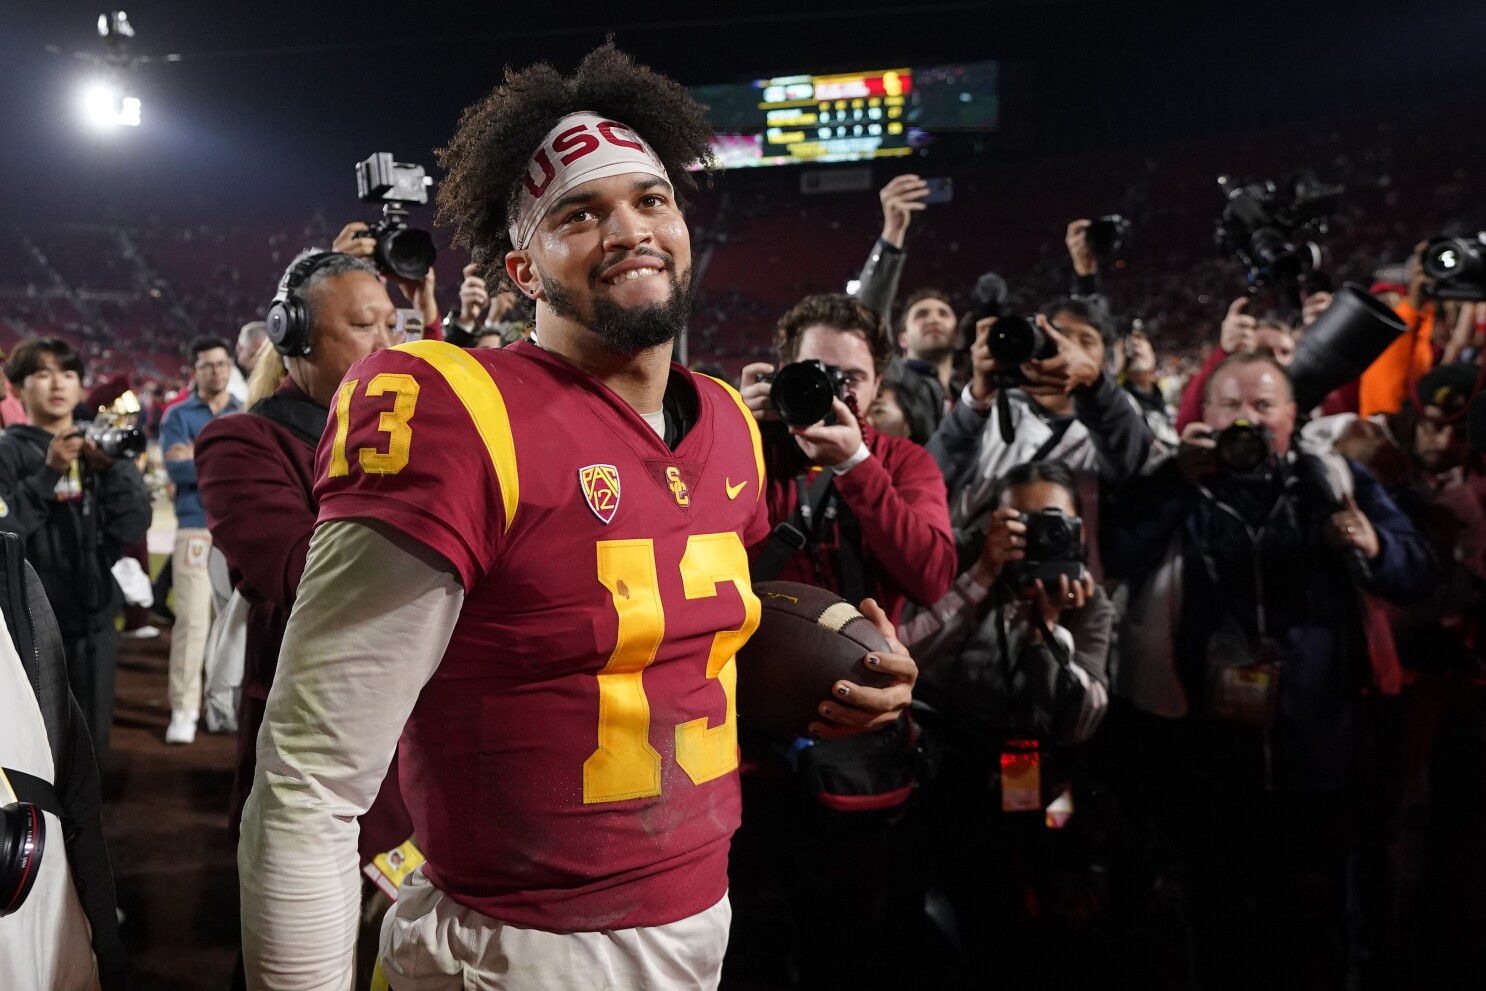 Pick Six: Can USC's Caleb Williams join Archie Griffin as a two-time  Heisman Trophy winner?